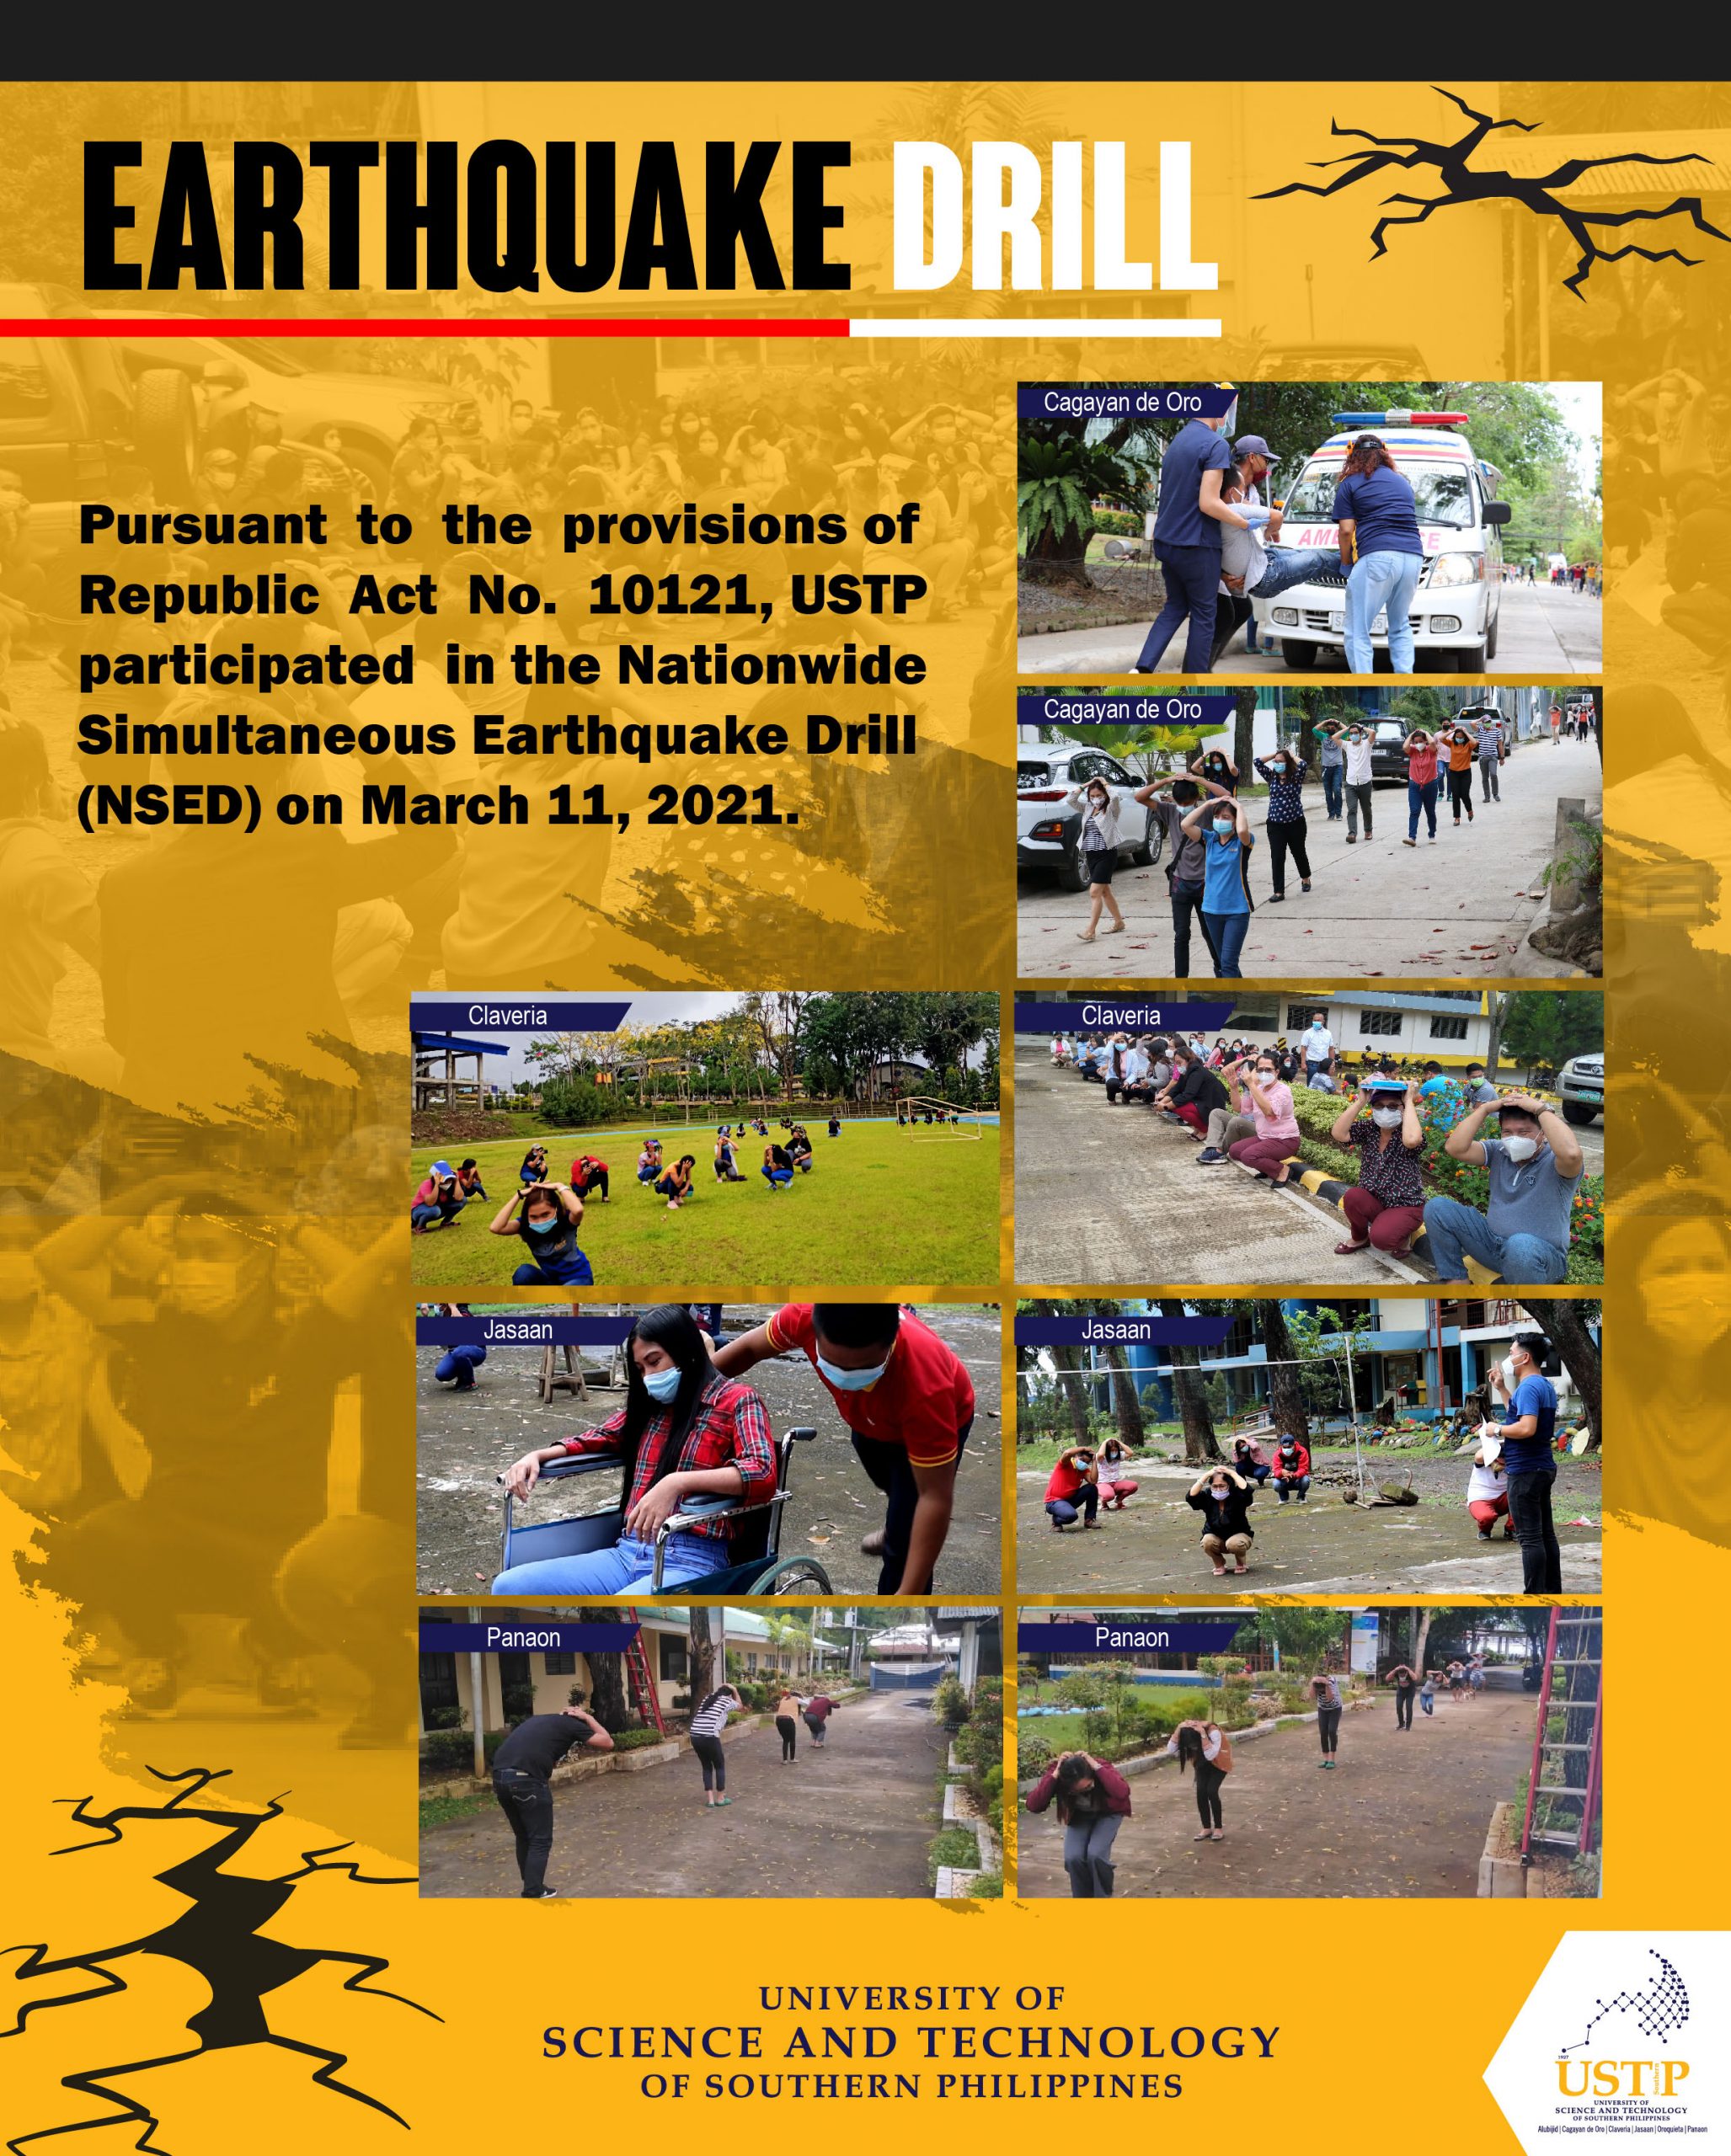 earthquake in the philippines essay